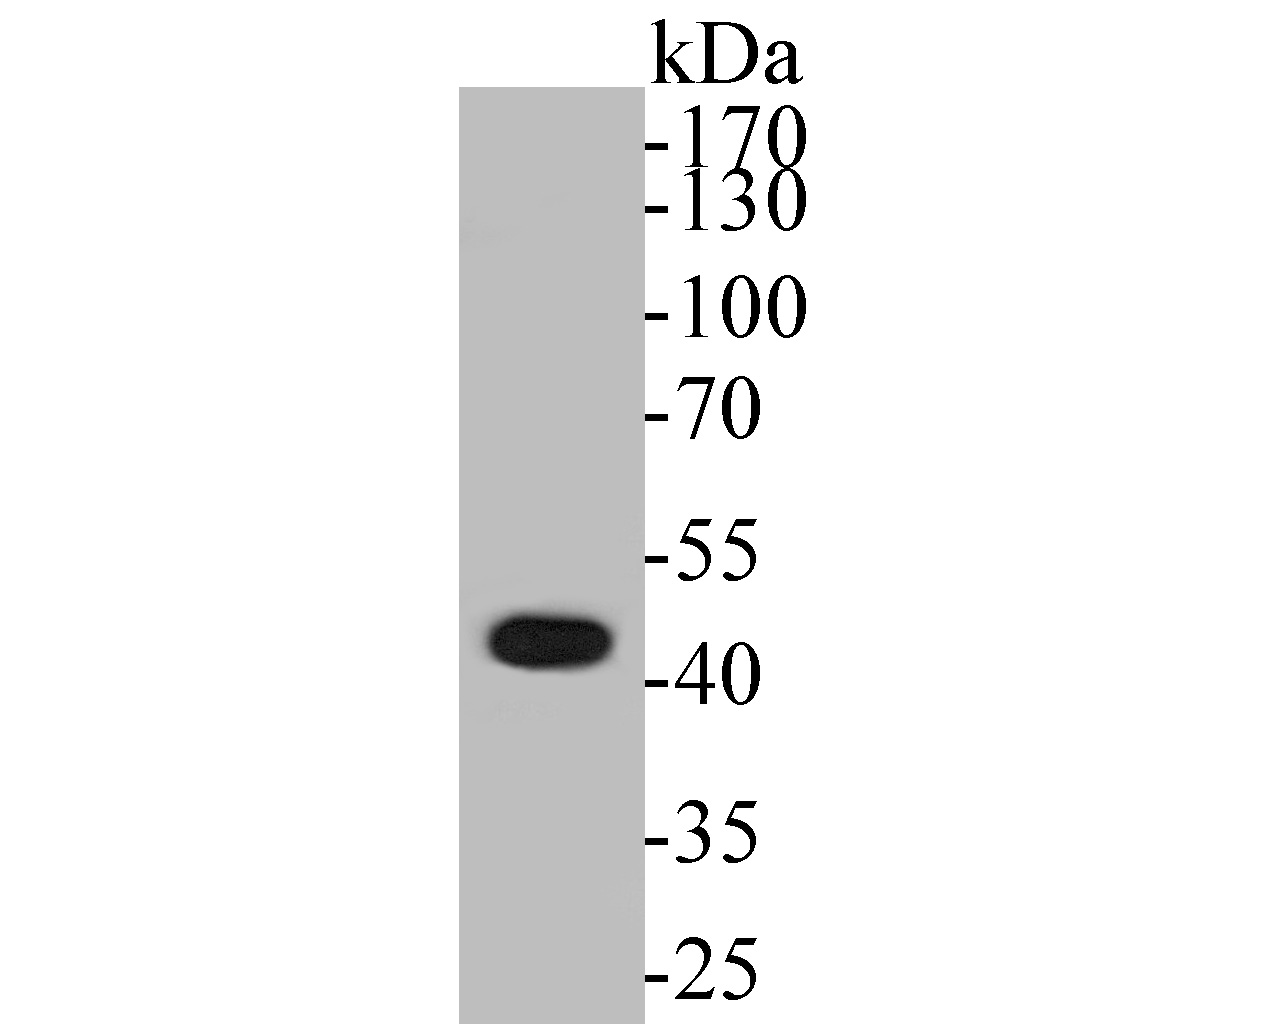 Western blot analysis of ABI2 on MCF-7 cell lysates. Proteins were transferred to a PVDF membrane and blocked with 5% BSA in PBS for 1 hour at room temperature. The primary antibody (ET7110-42, 1/500) was used in 5% BSA at room temperature for 2 hours. Goat Anti-Rabbit IgG - HRP Secondary Antibody (HA1001) at 1:5,000 dilution was used for 1 hour at room temperature.